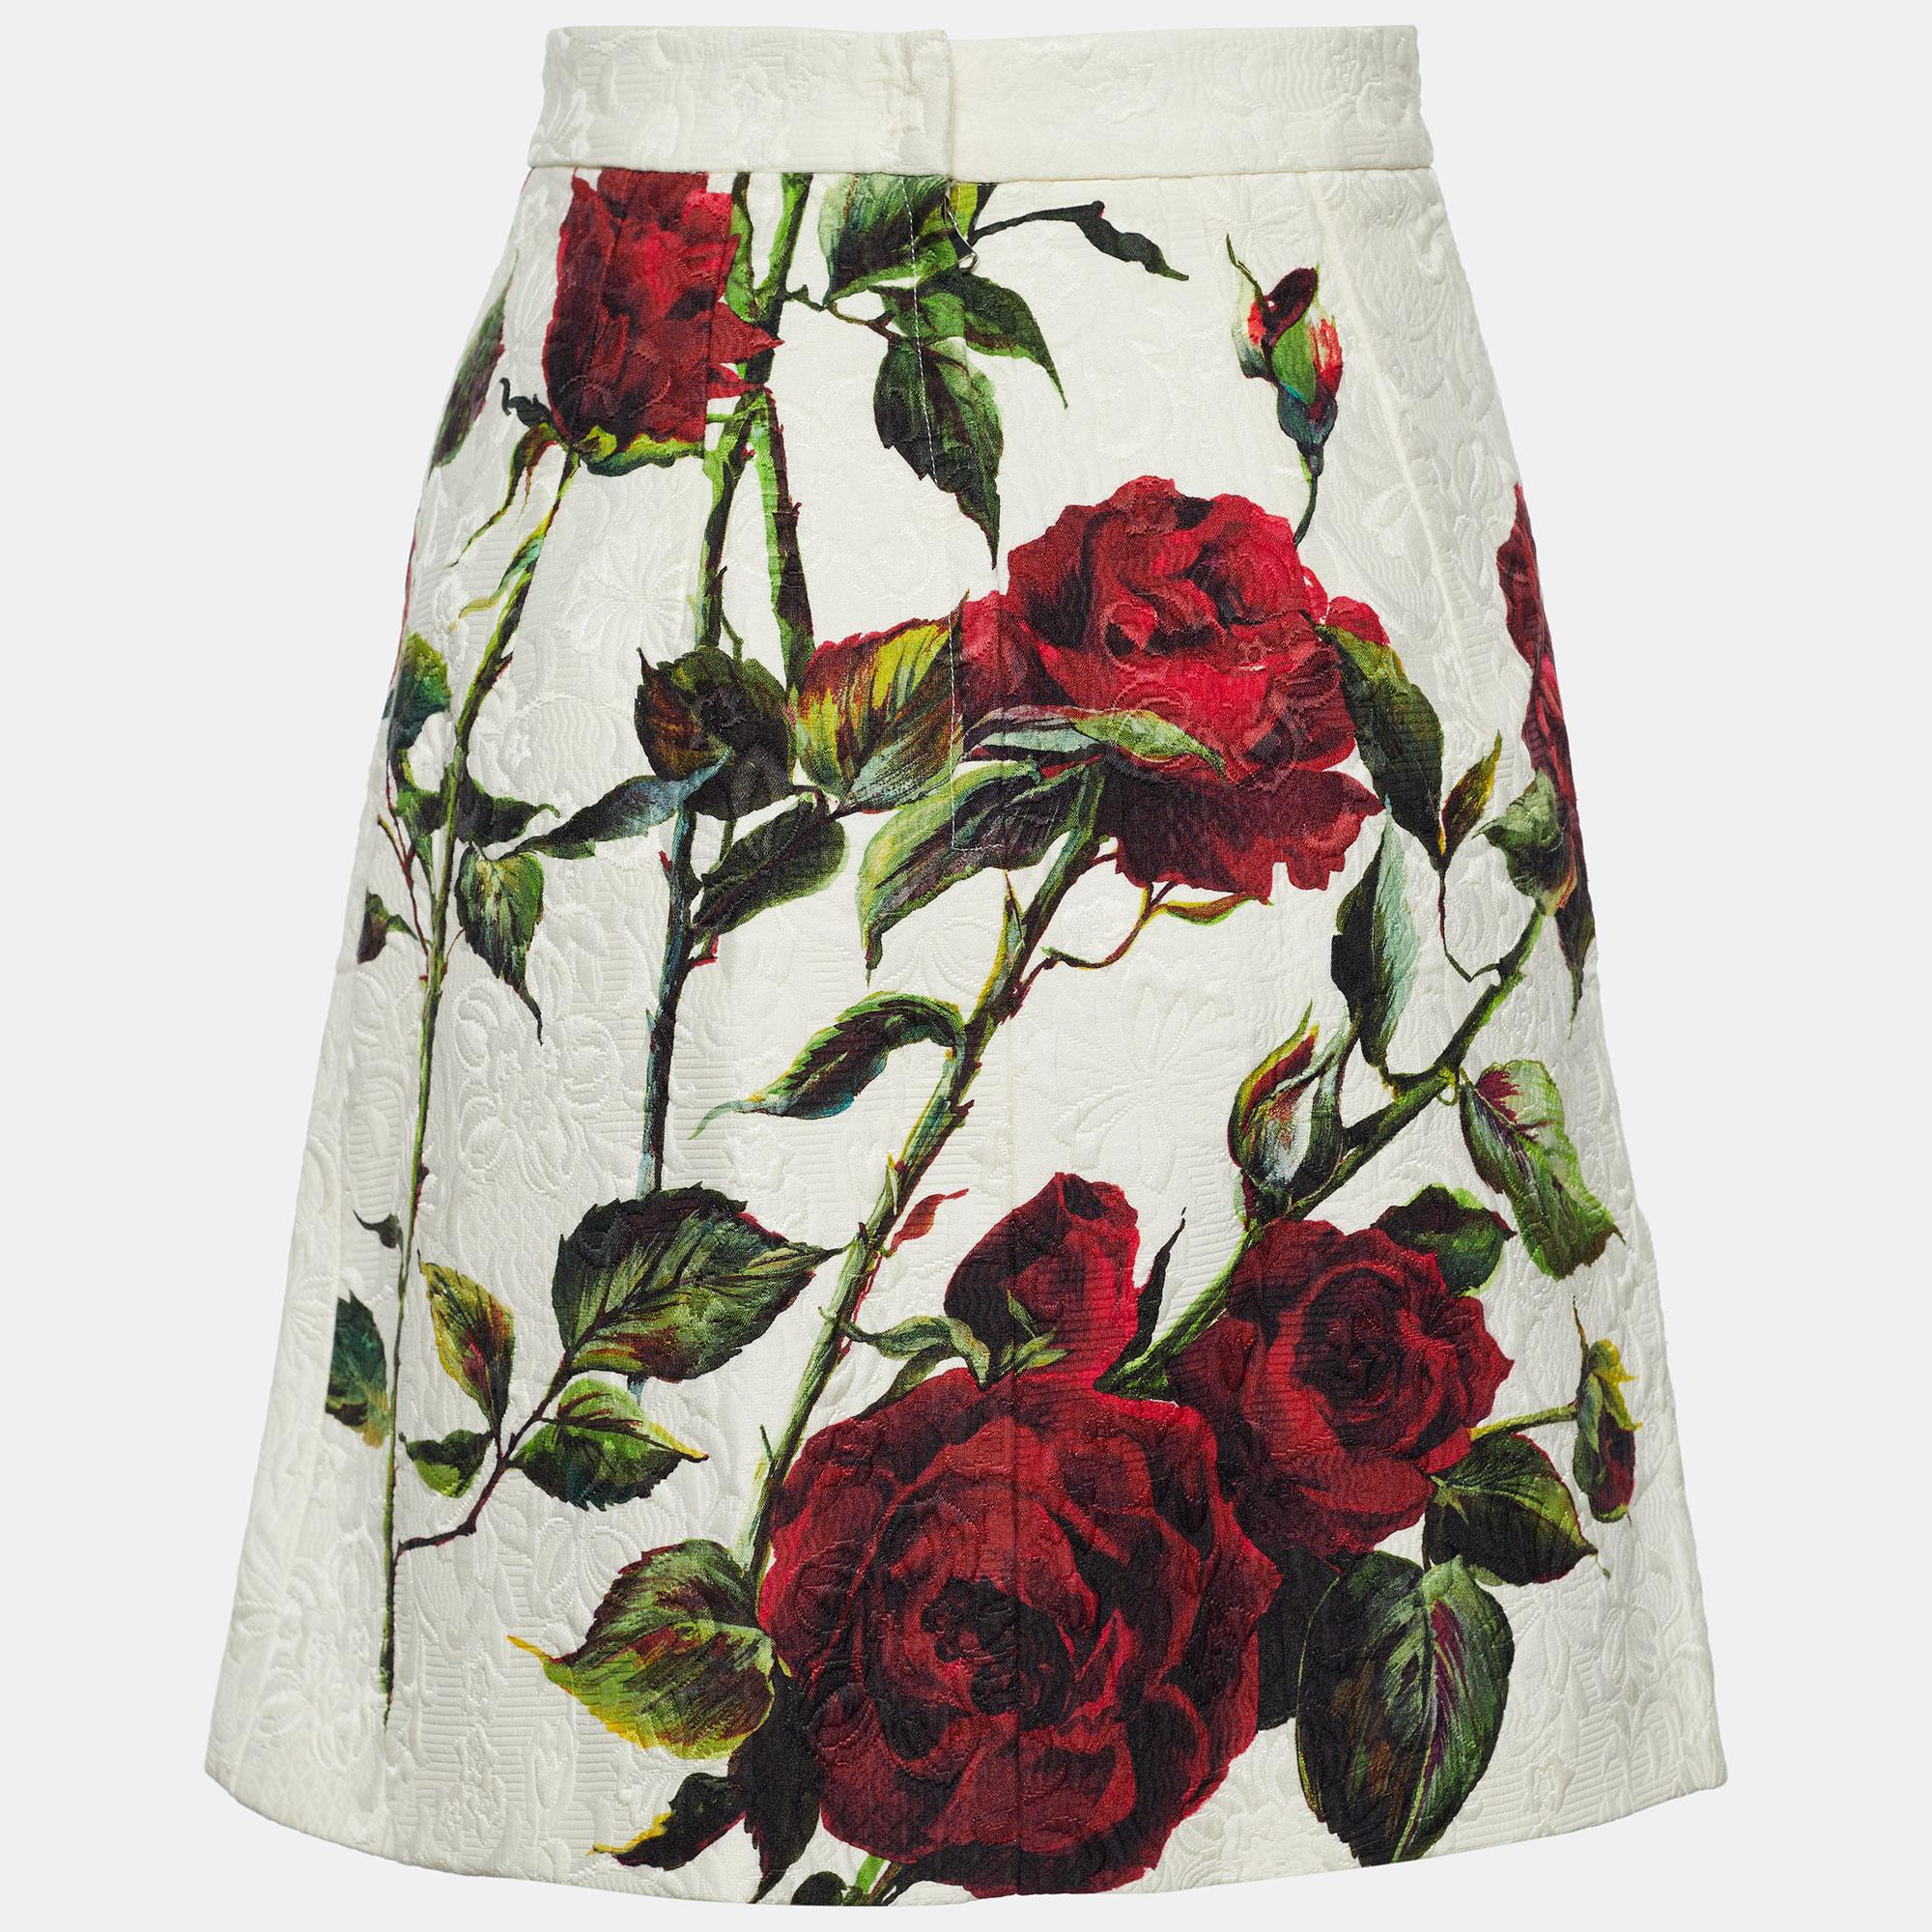 Cut into a feminine silhouette, this skirt by Dolce & Gabbana will impress you with its romantic aesthetic and elegant appeal. It is beautifully crafted from a mix of quality fabrics and is decorated with a pleasant rose print. Wear it with a crop